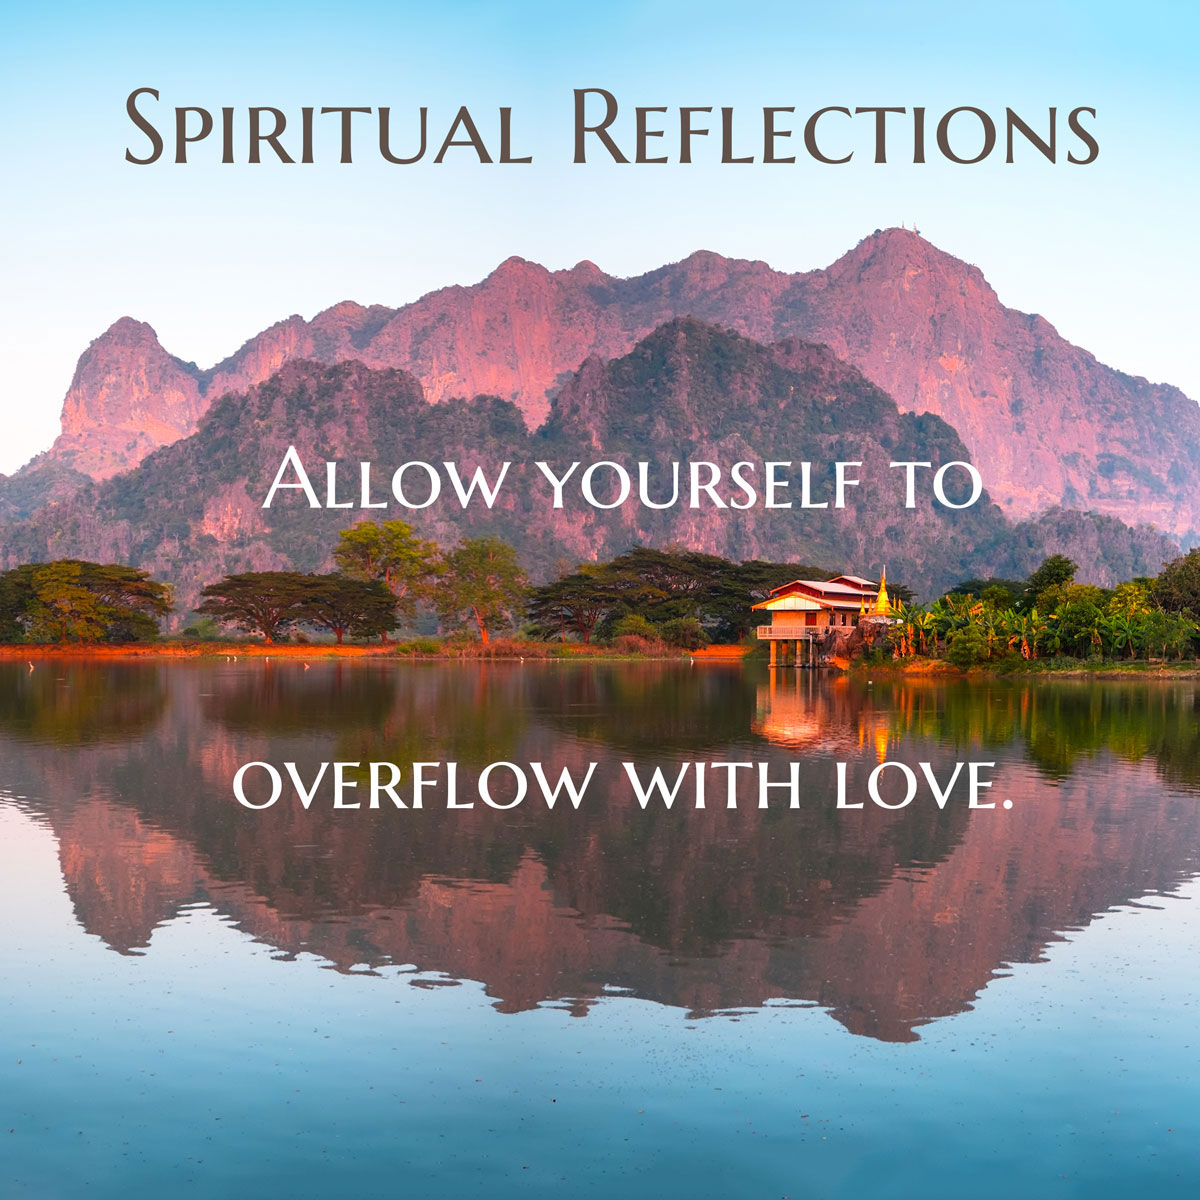 Allow yourself to overflow with love.